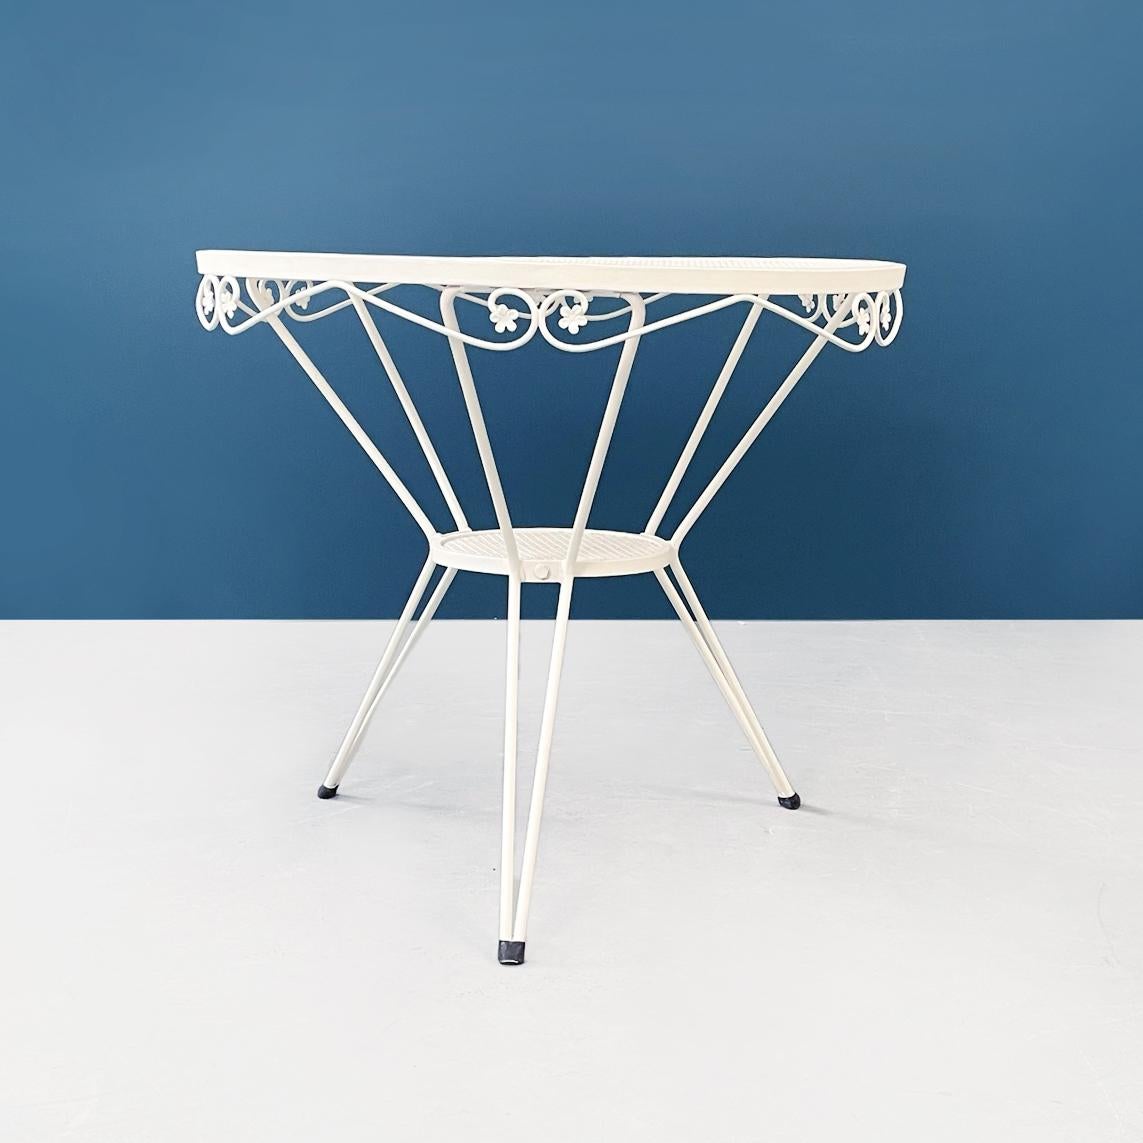 Italian Mid-Century Modern White iron garden round table with flower decor, 1960s.
Garden table in white painted iron with perforated round top. The edge of the top is finely worked with floral decorations and curls. Under the main top there is a